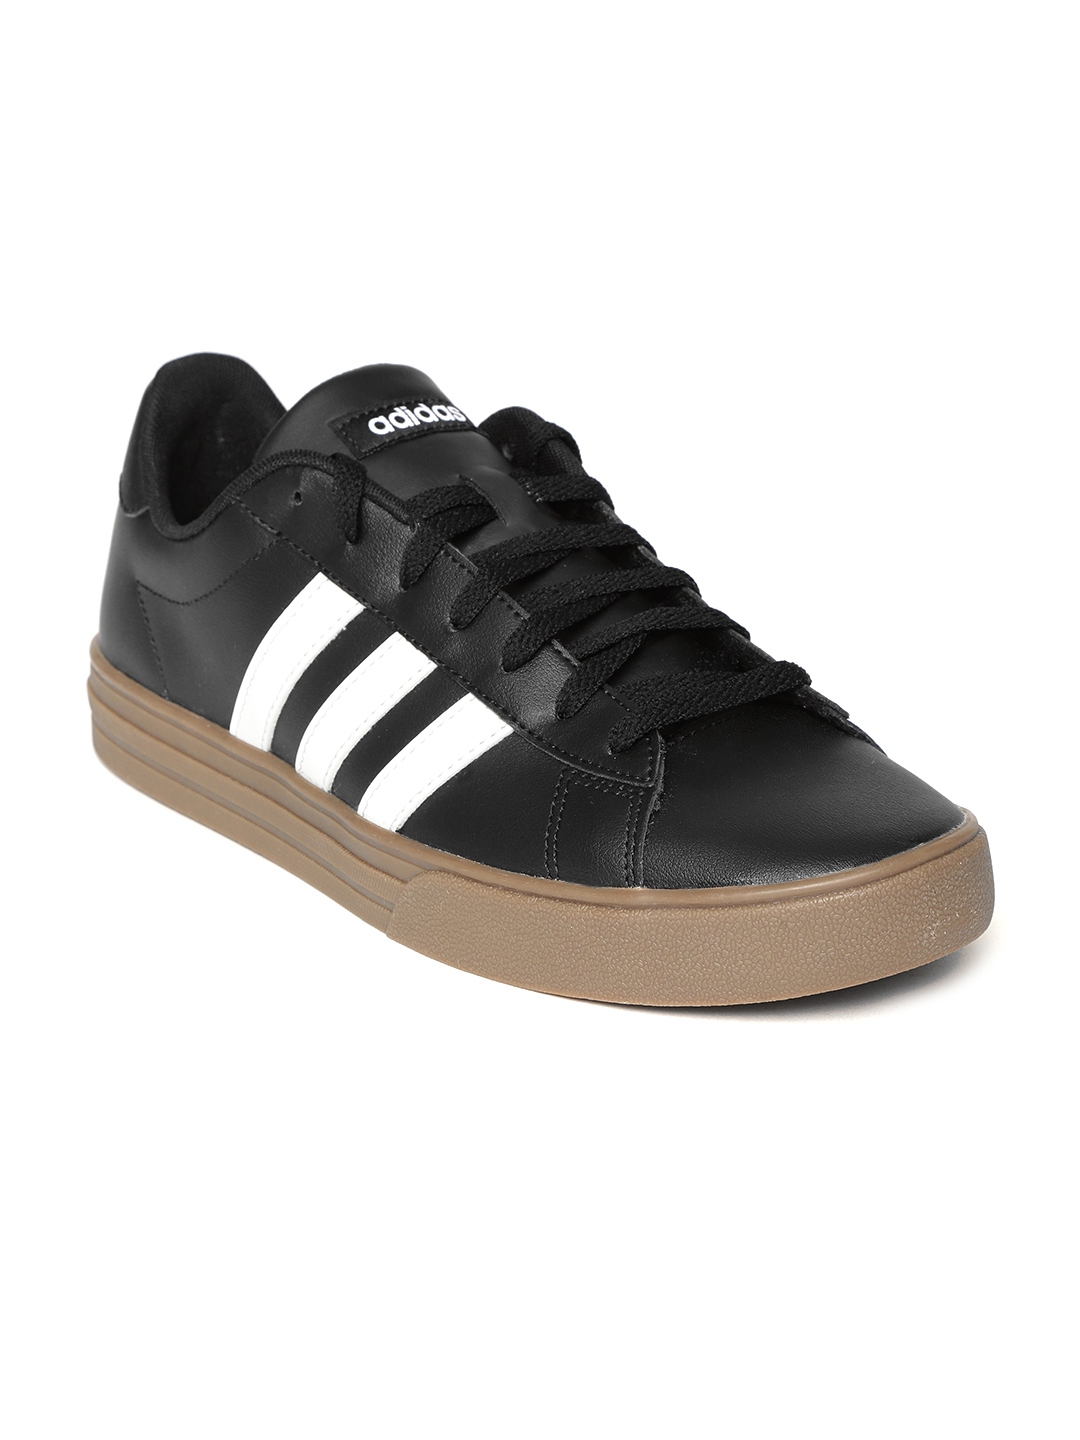 Buy ADIDAS Men Black Daily 2.0 Sneakers - Casual Shoes for Men 8617239 ...